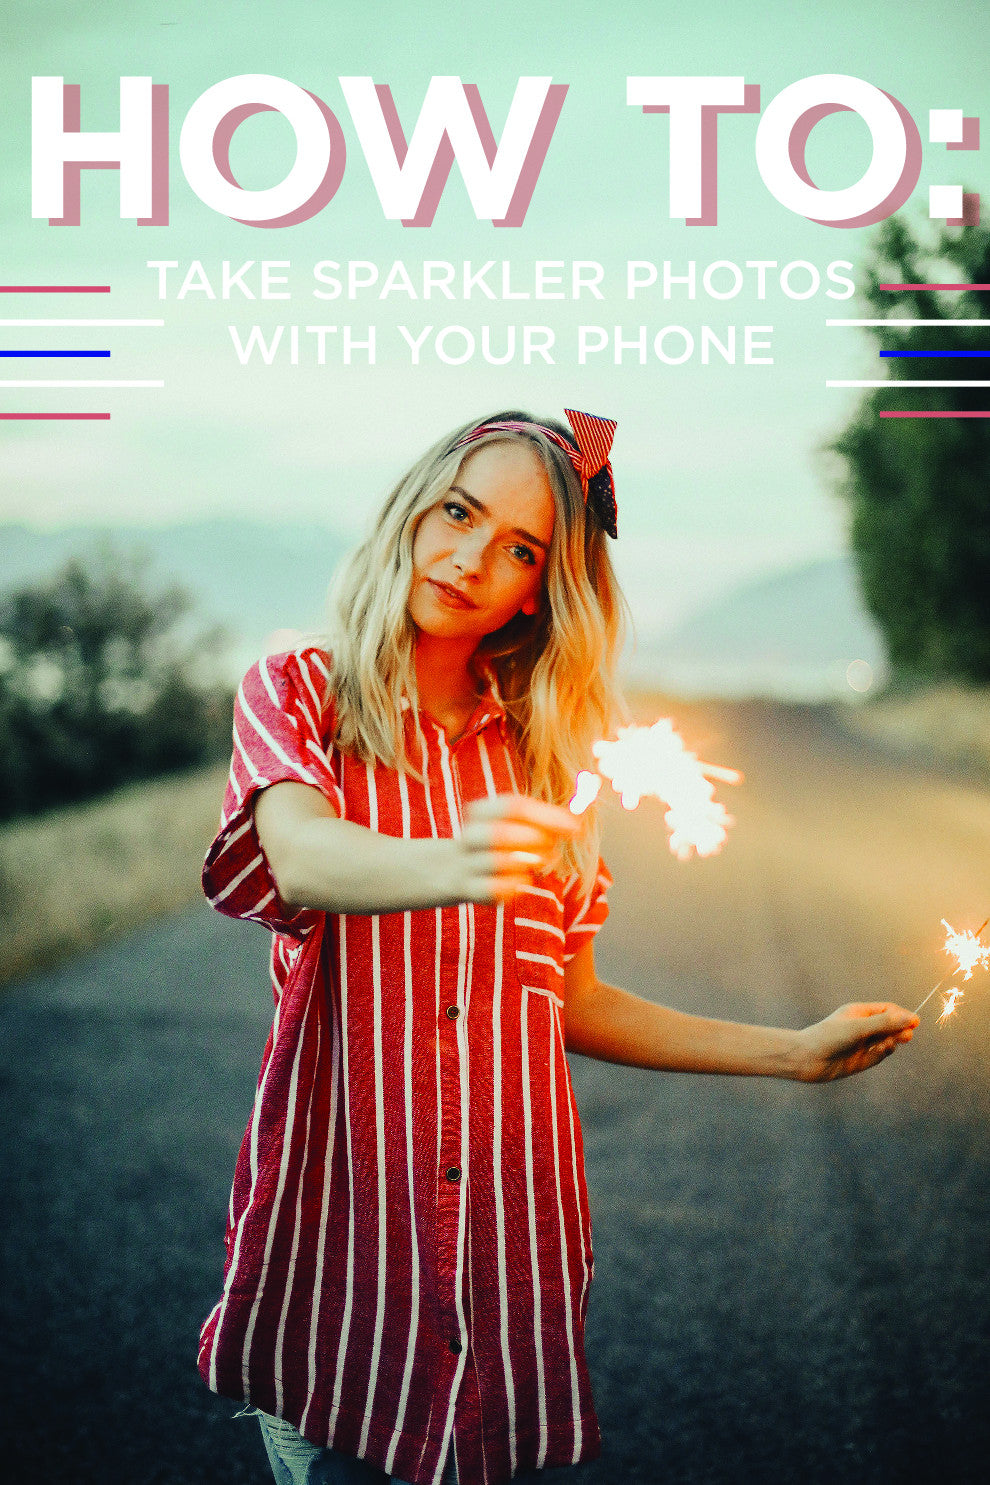 HOW TO: Take sparkler photos with your phone